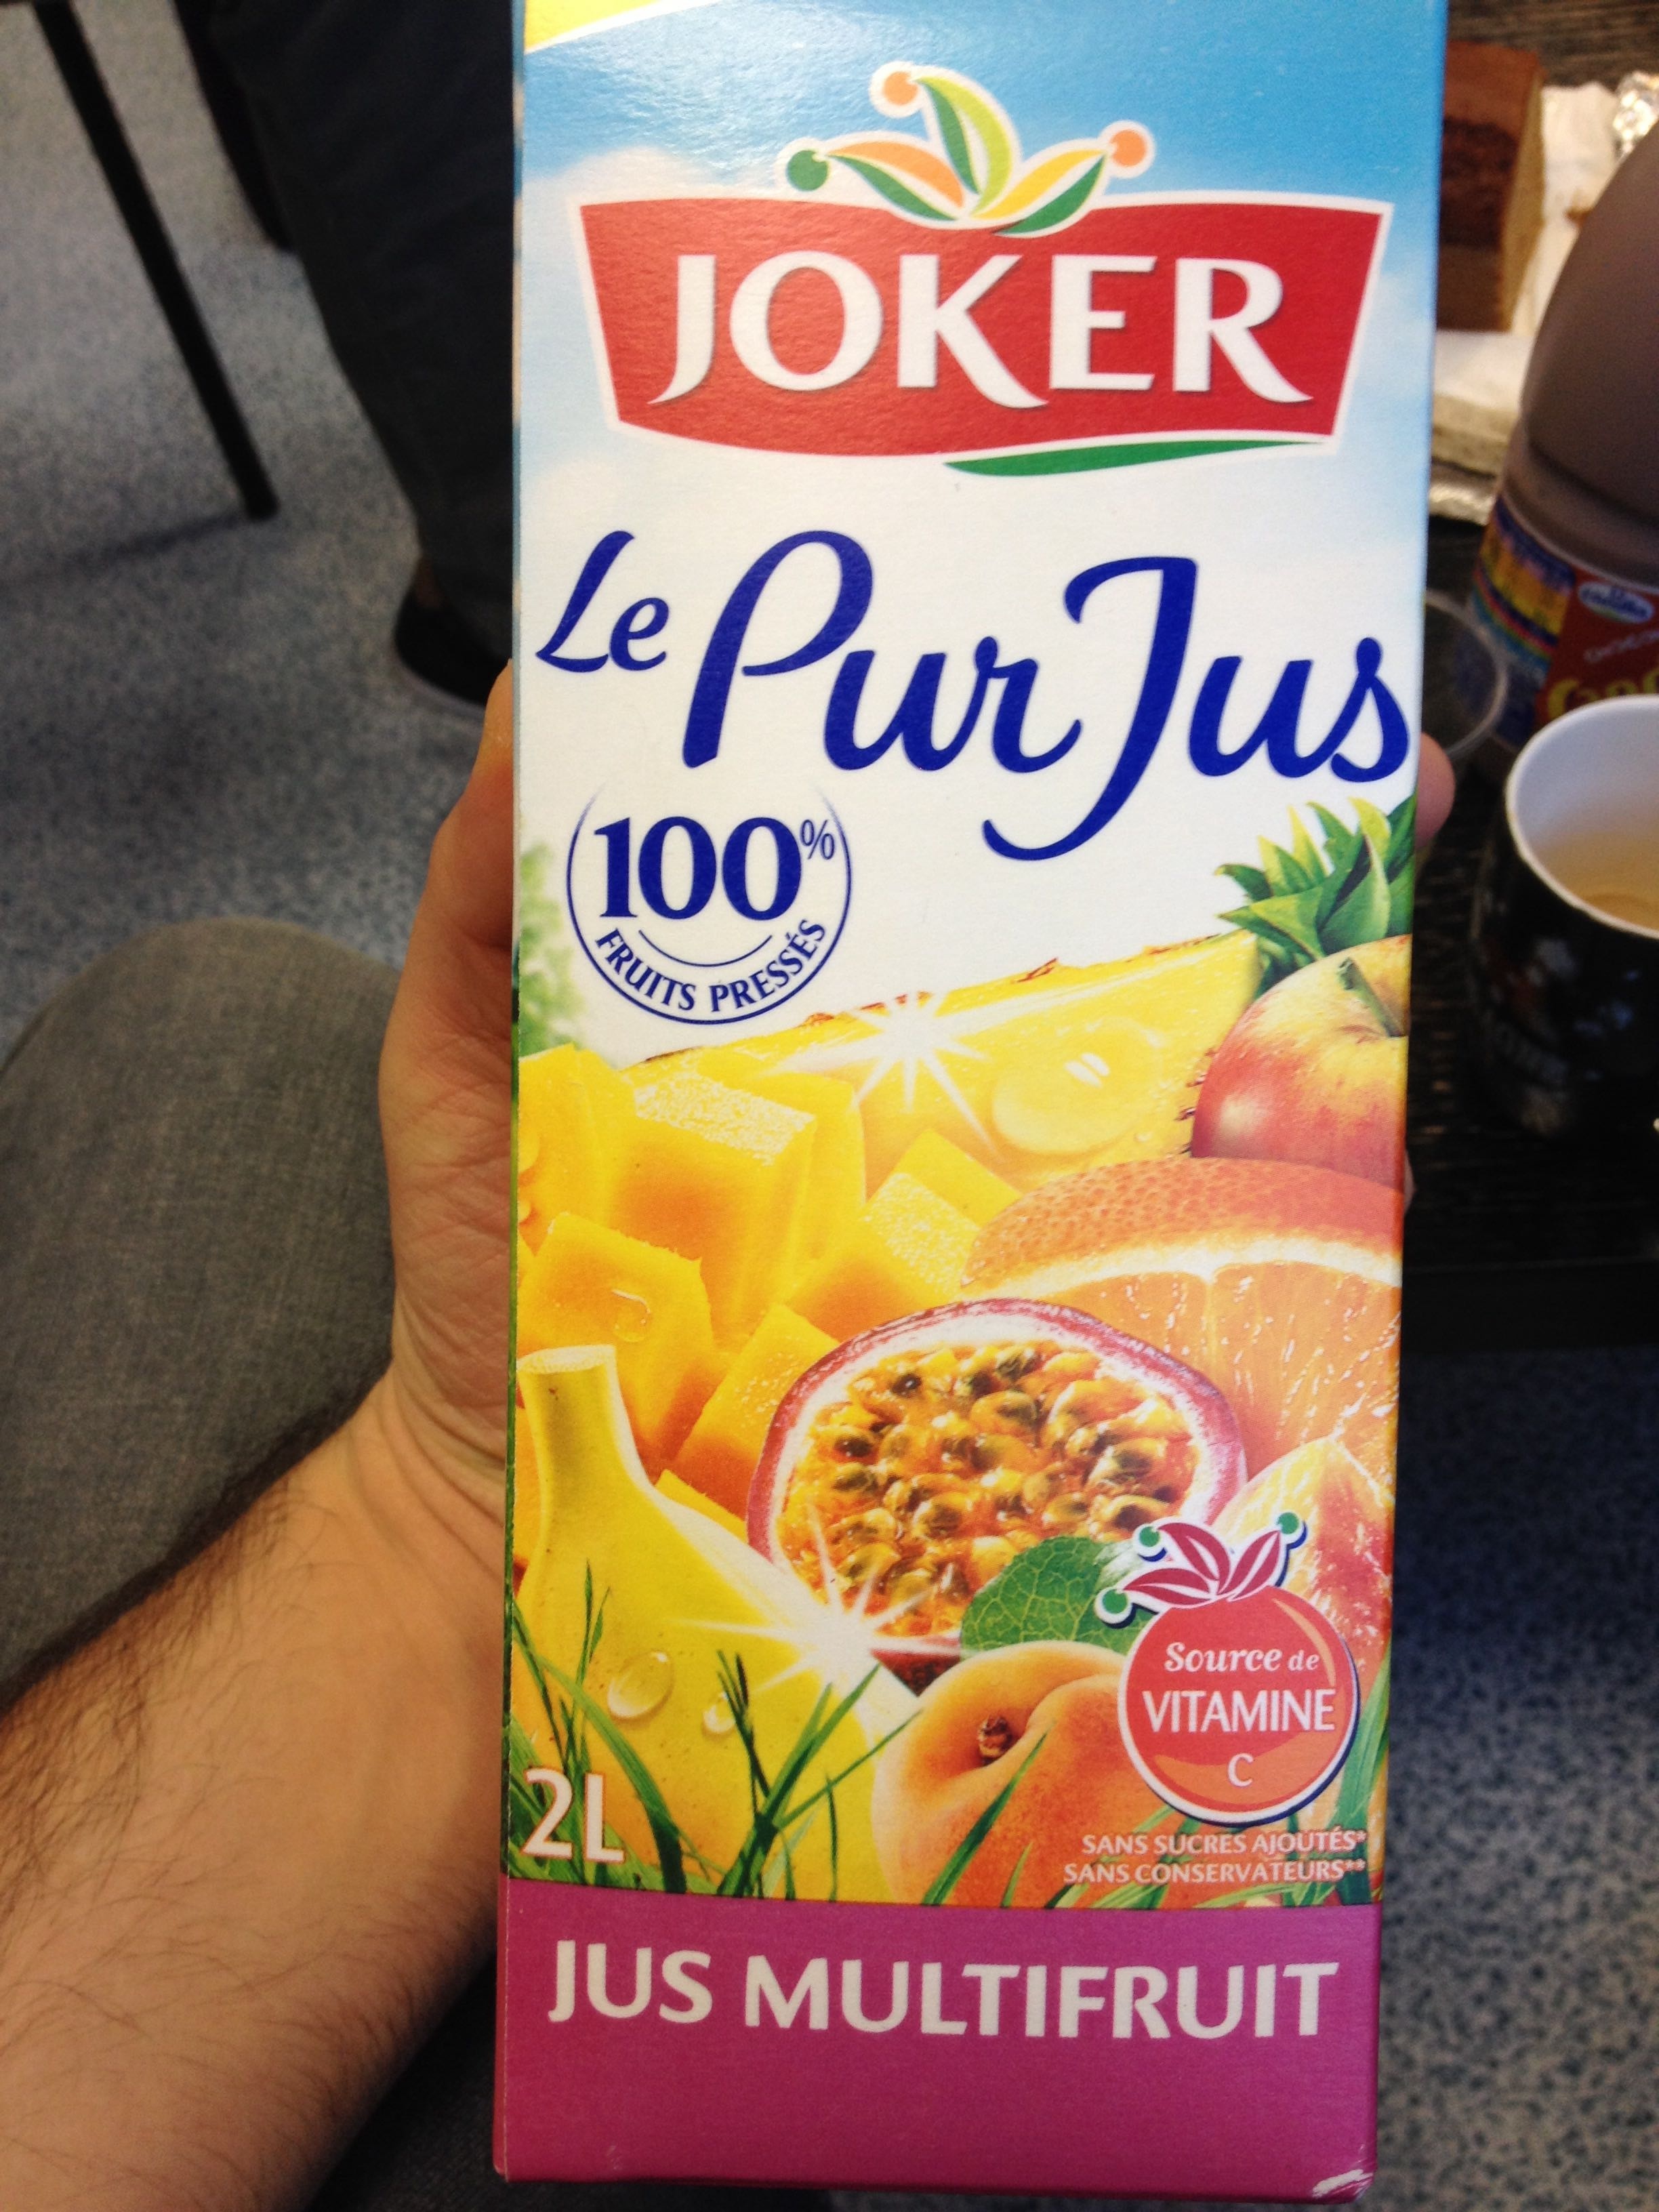 Le pur jus (jus multifruit) - Product - fr